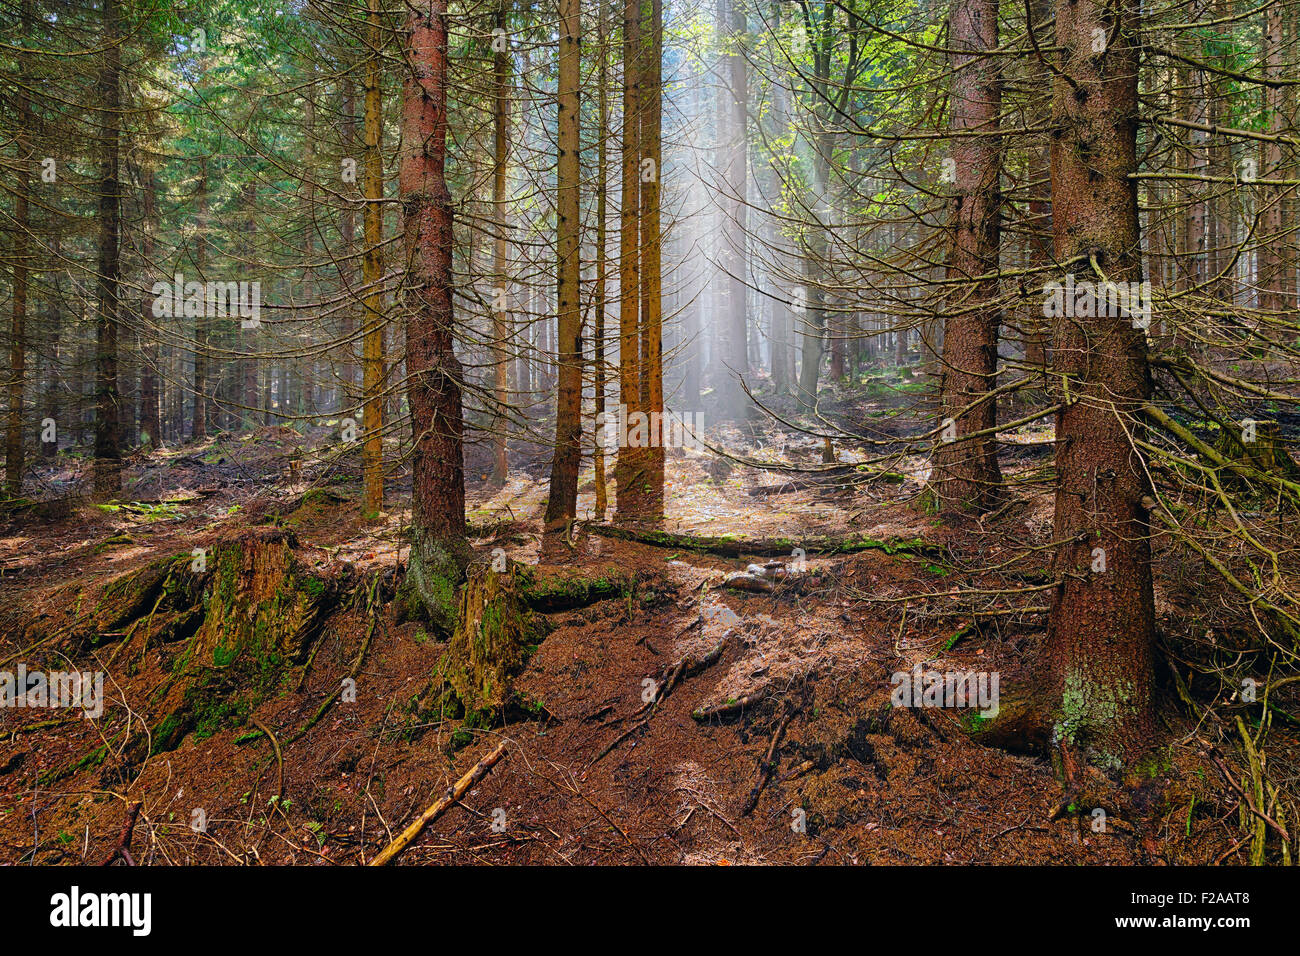 The old spruce forest in falls morning Stock Photo